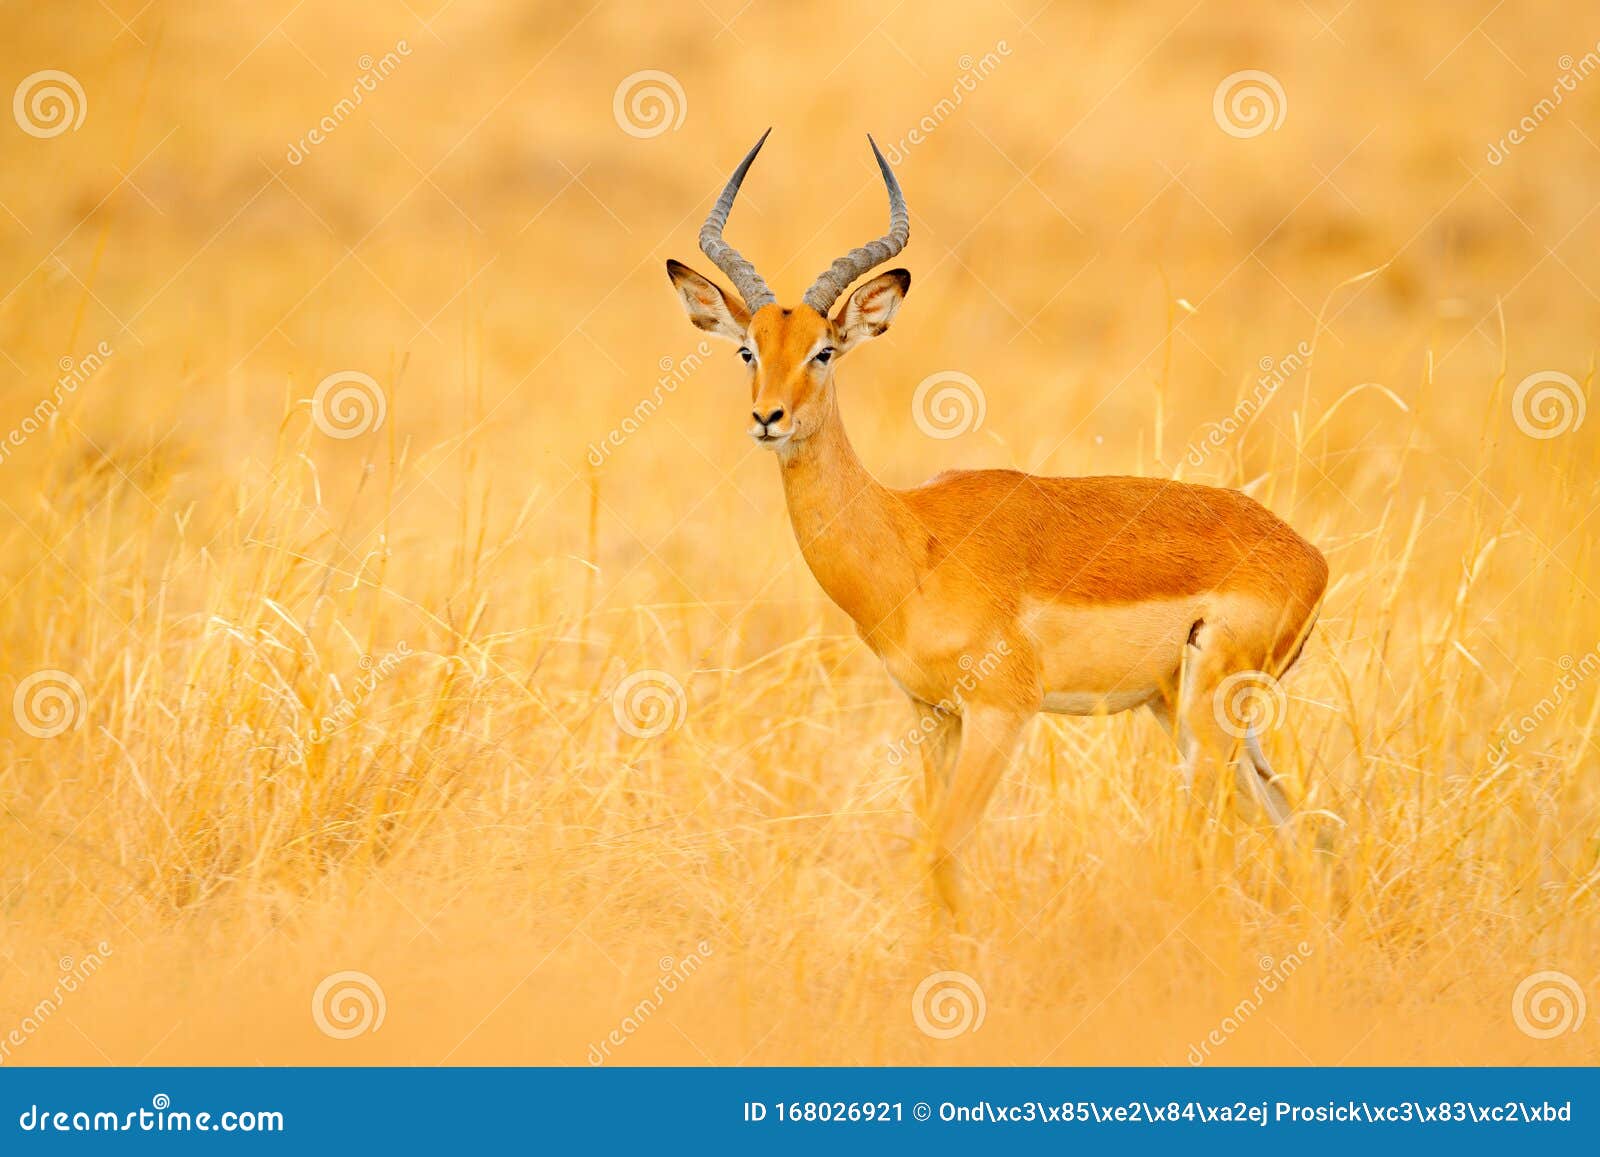 impala in golden grass. beautiful impala in the grass with evening sun. animal in the nature habitat. sunset in africa wildlife.